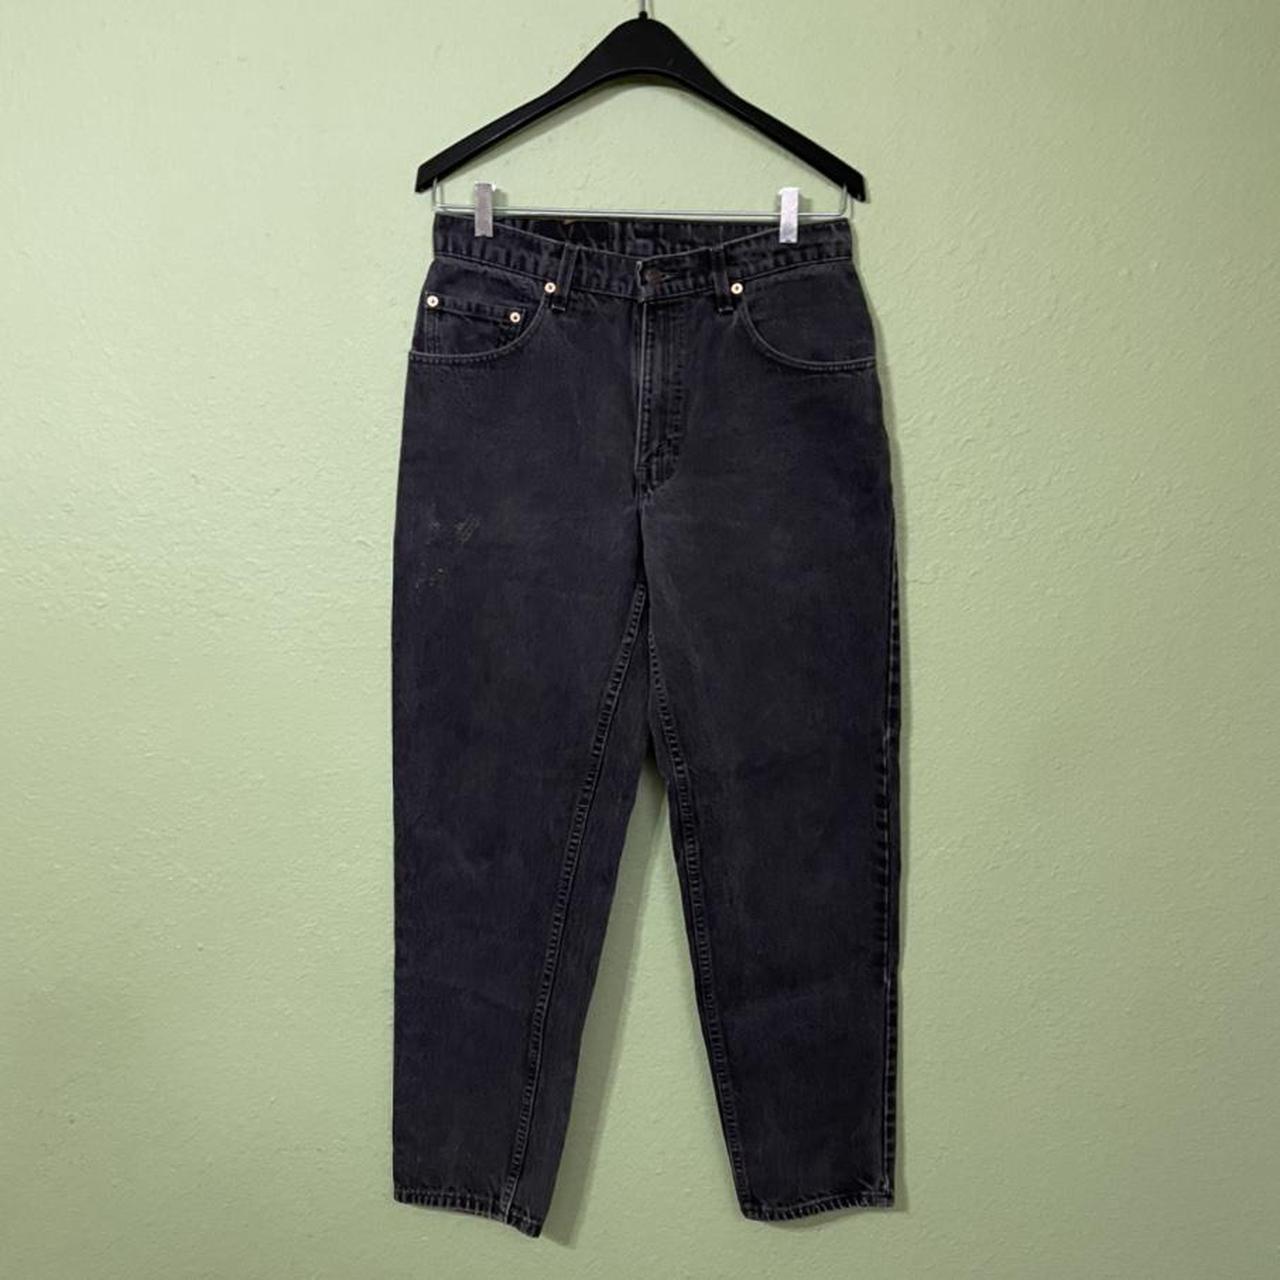 Product Image 2 - Vintage Levi’s 560’s in all